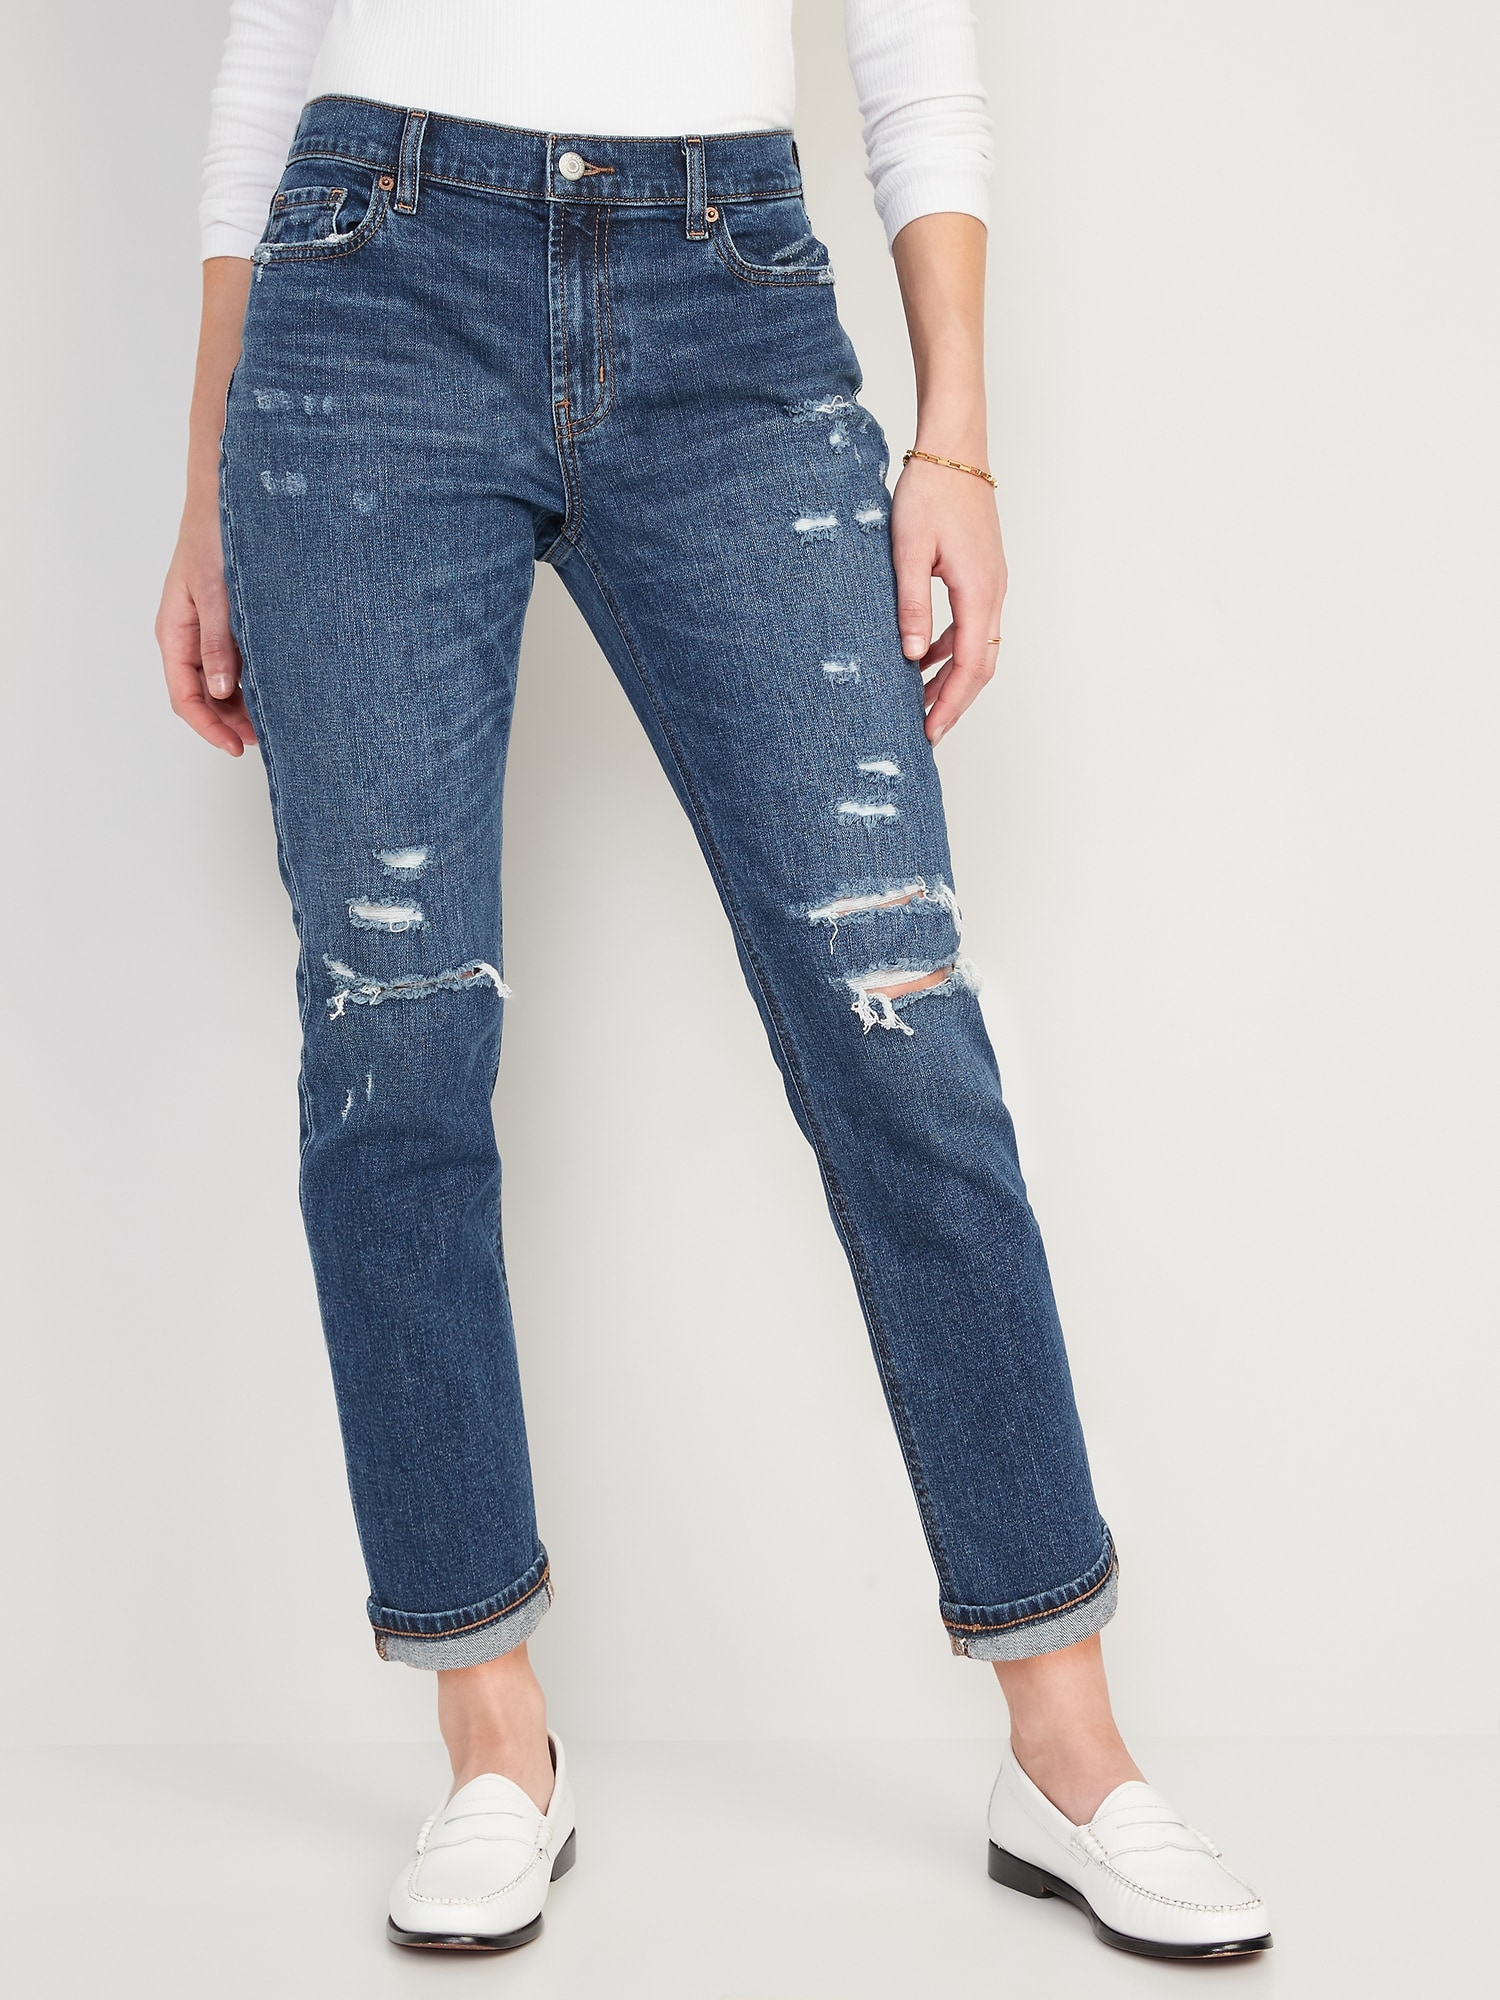 Buy Qeboo Collection Blue Cargo Style Boyfriend Jeans for Women High Waist Straight  Fit Non Stretch Denim (Size - 26)-1210-NBL at Amazon.in